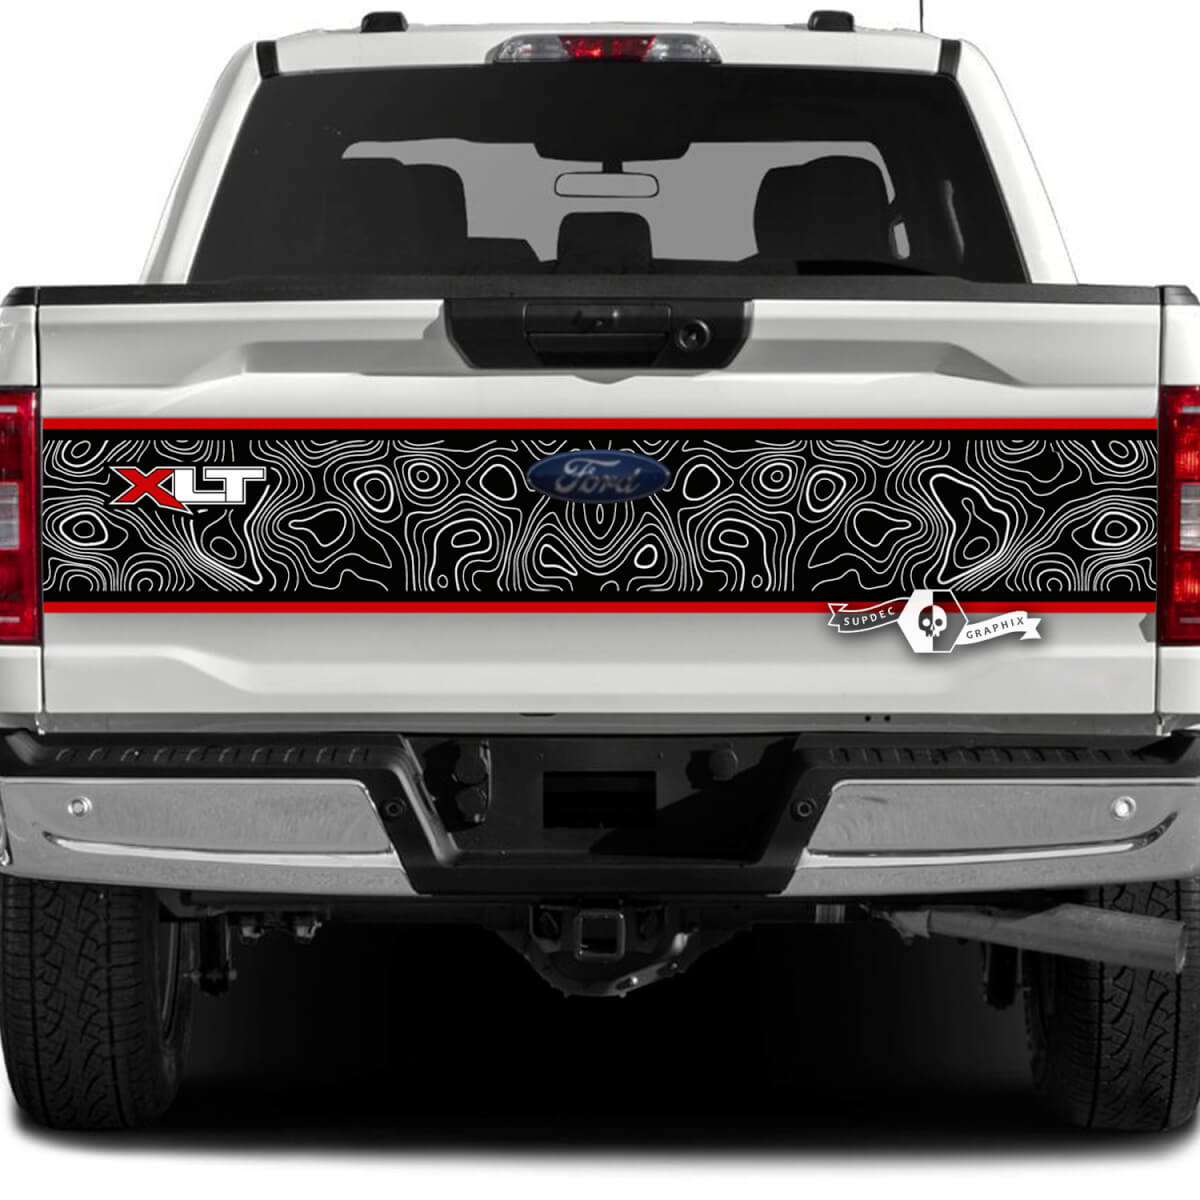 Ford F-150 XLT Tailgate Splash Topographic Map Graphics Side Decals Stickers 3 Colors
